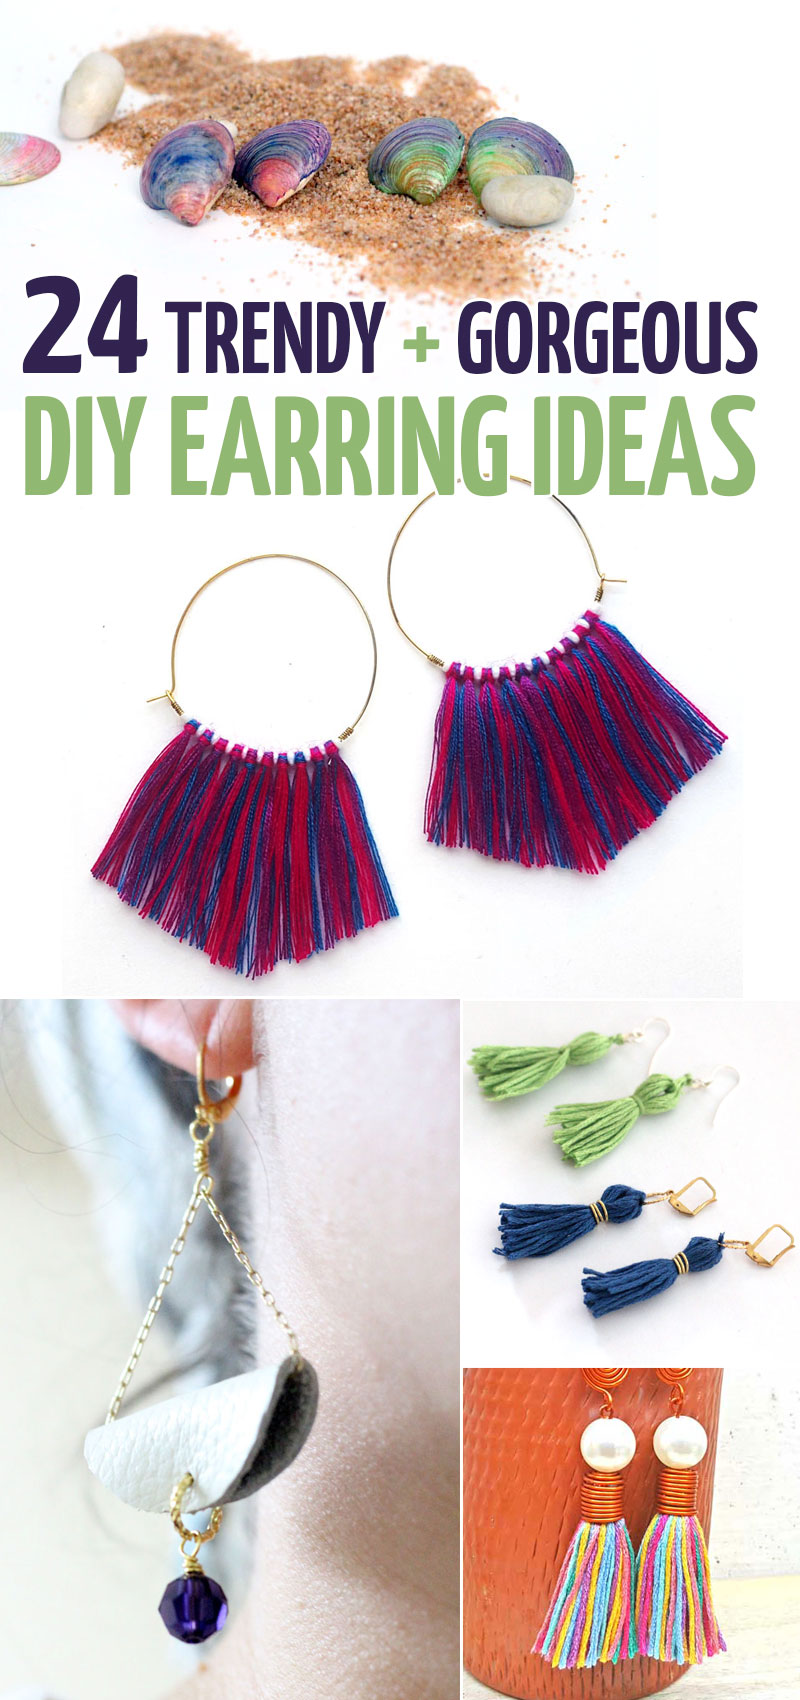 How to make a DIY wood and leather bag tassel - easy craft project!